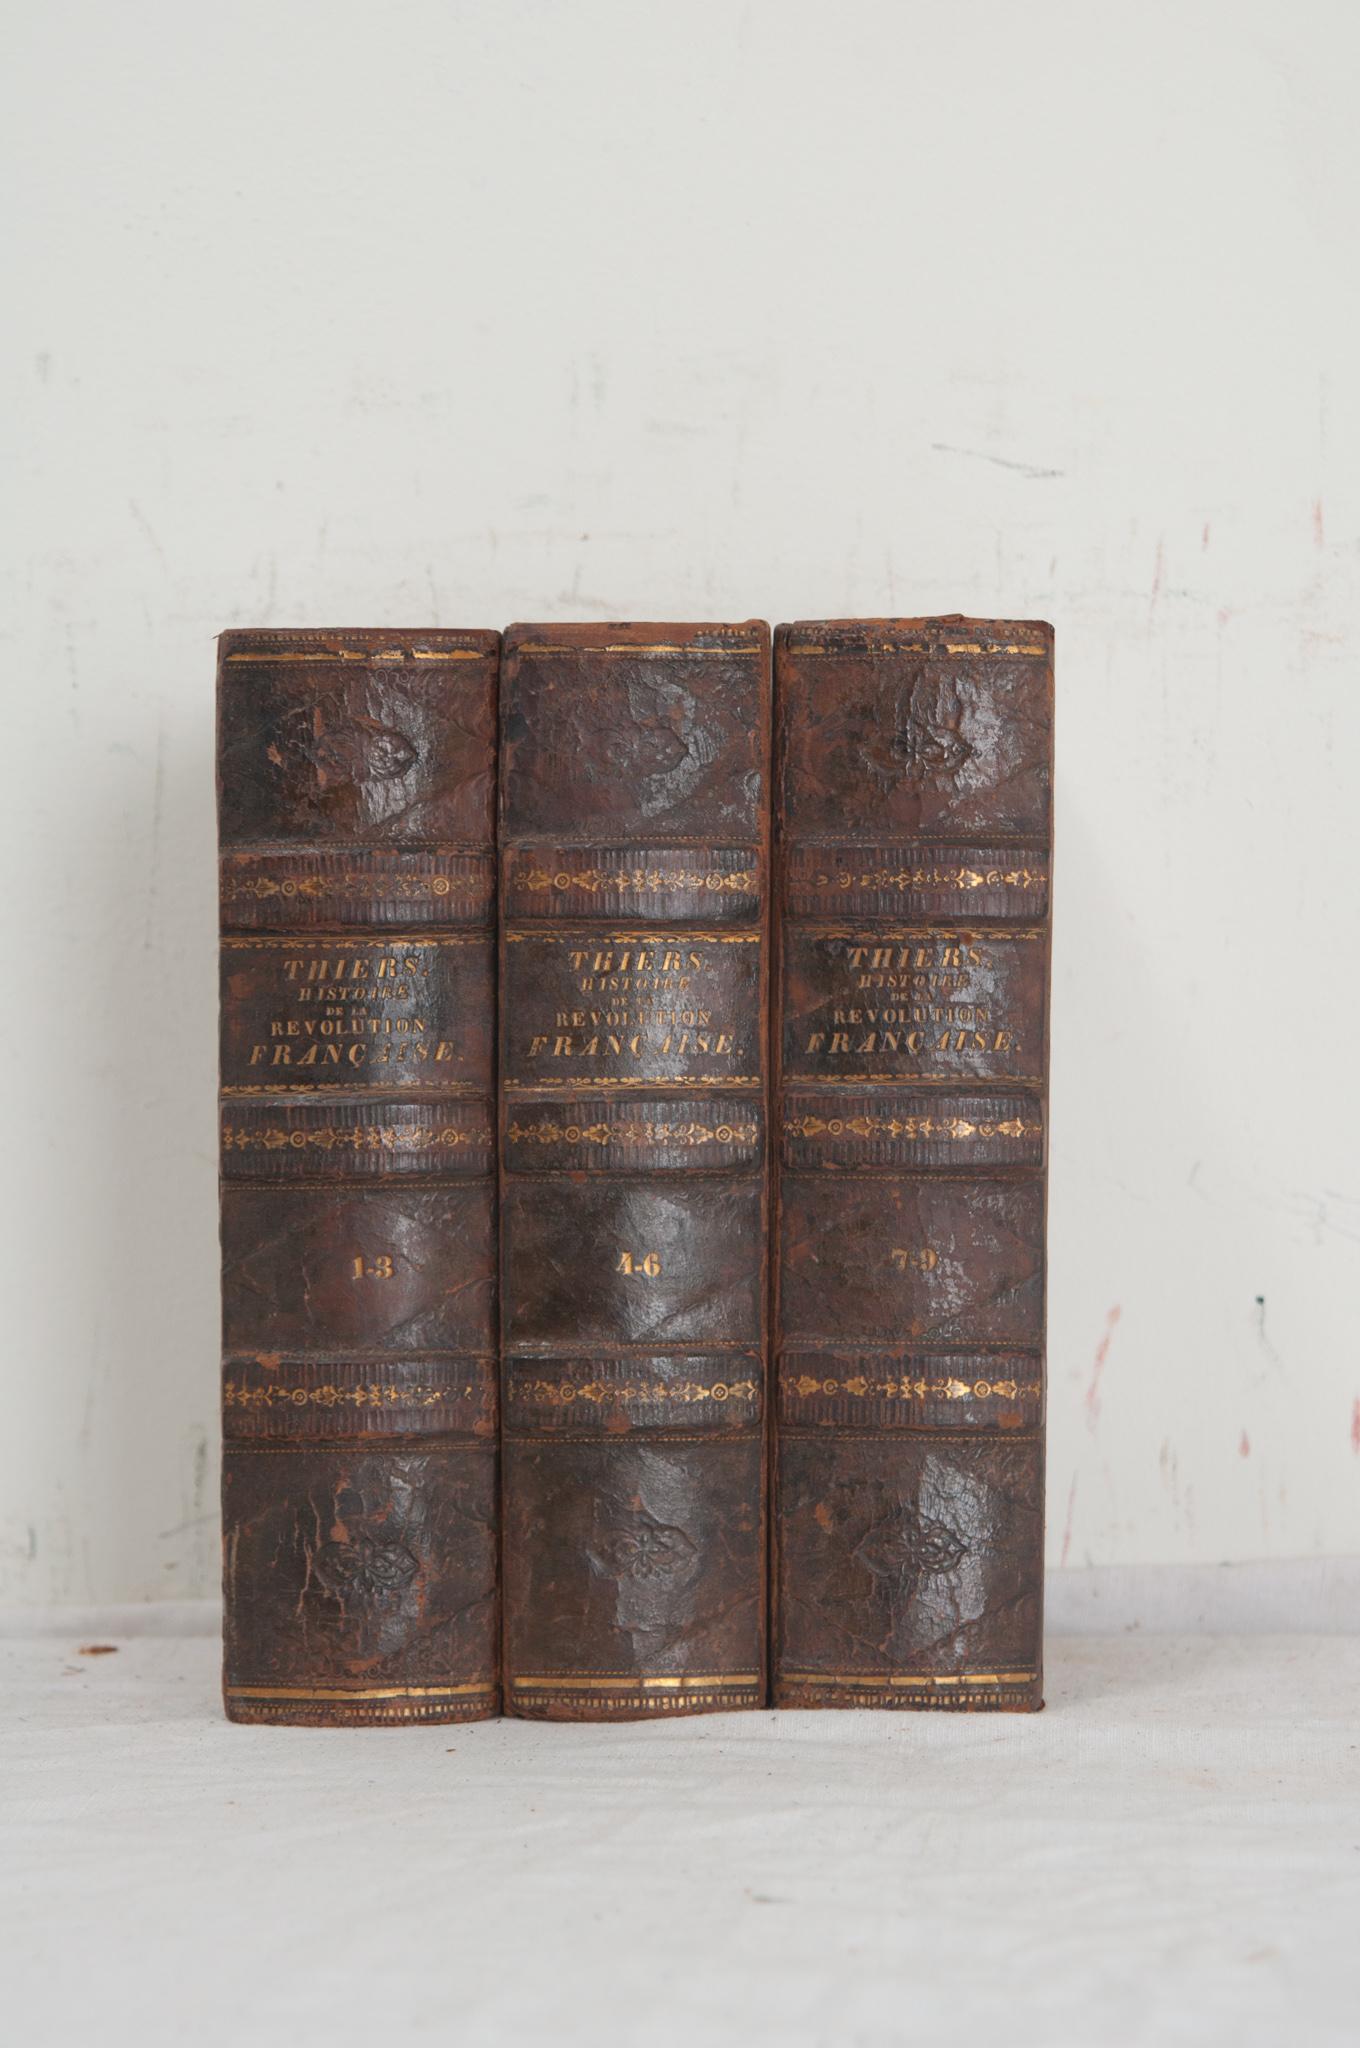 A collection of three volumes on the French Revolution by M. A. Theirs. This set of books is bound in leather with the title, author, and respective volume number stamped in gold lettering. The pages have signs of discoloration, make sure to view